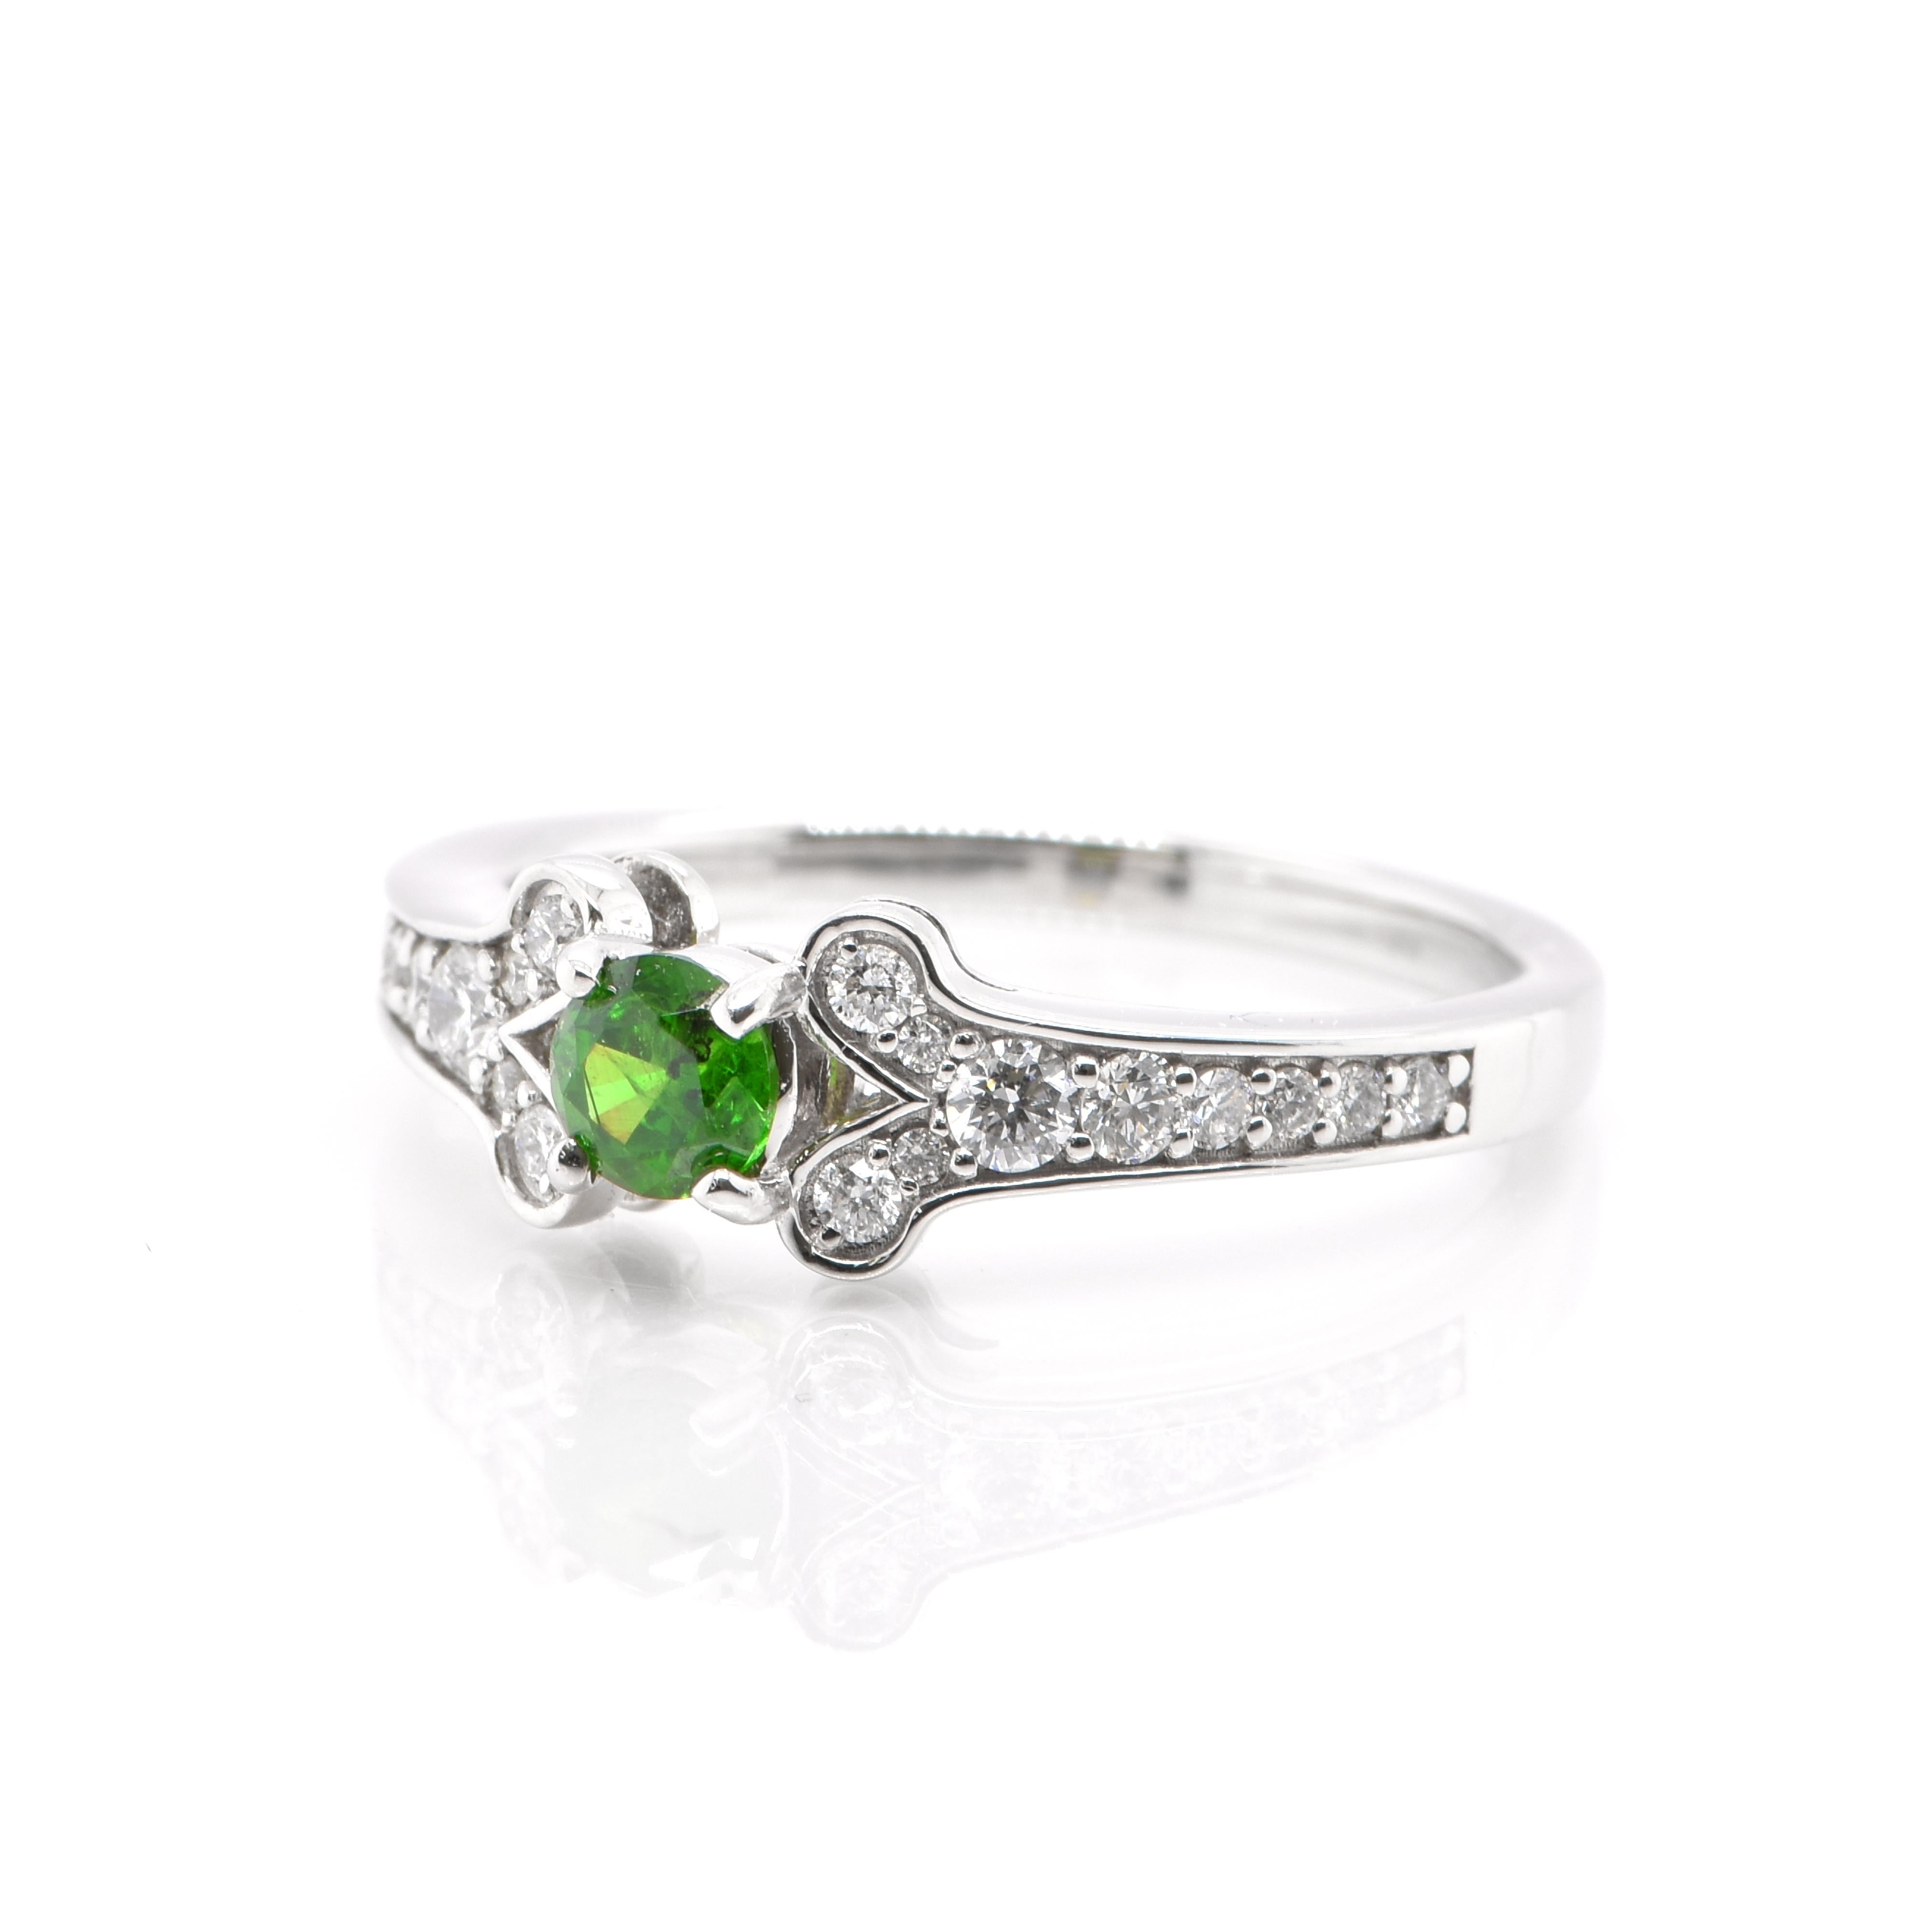 A beautiful Engagement ring consisting of a 0.33 Carat, Natural Demantoid Garnet and 0.26 Carats of White Round Brilliant Diamond Accents. Demantoid Garnet's only known source used to be the Ural Mountains in Russia however recent discoveries in